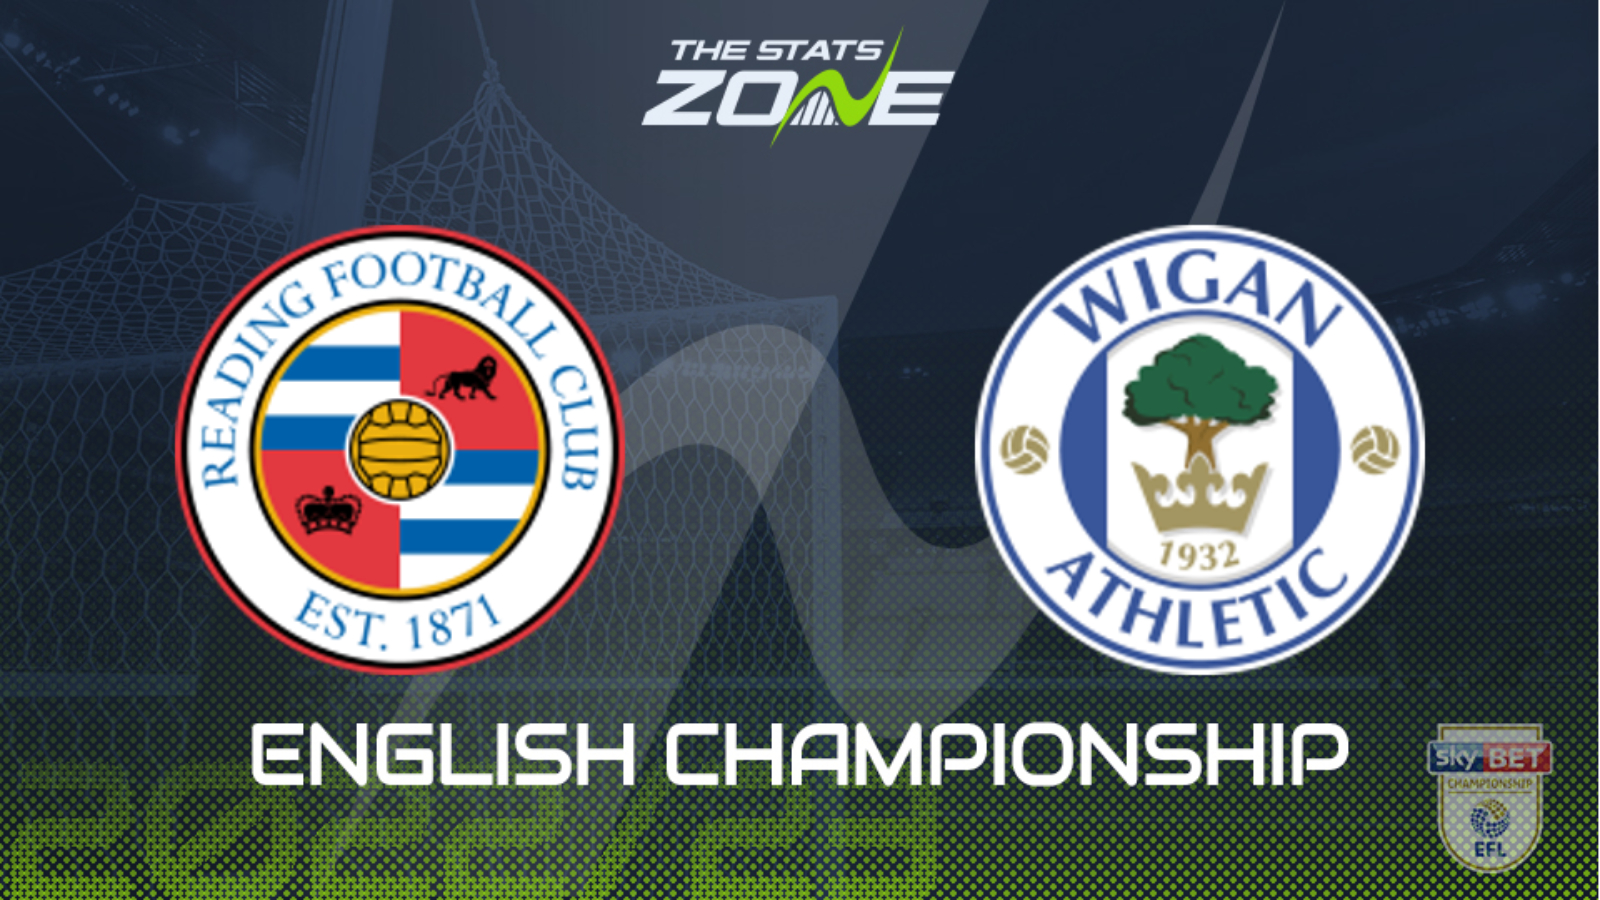 England Championship Predictions, Tips and Match Previews